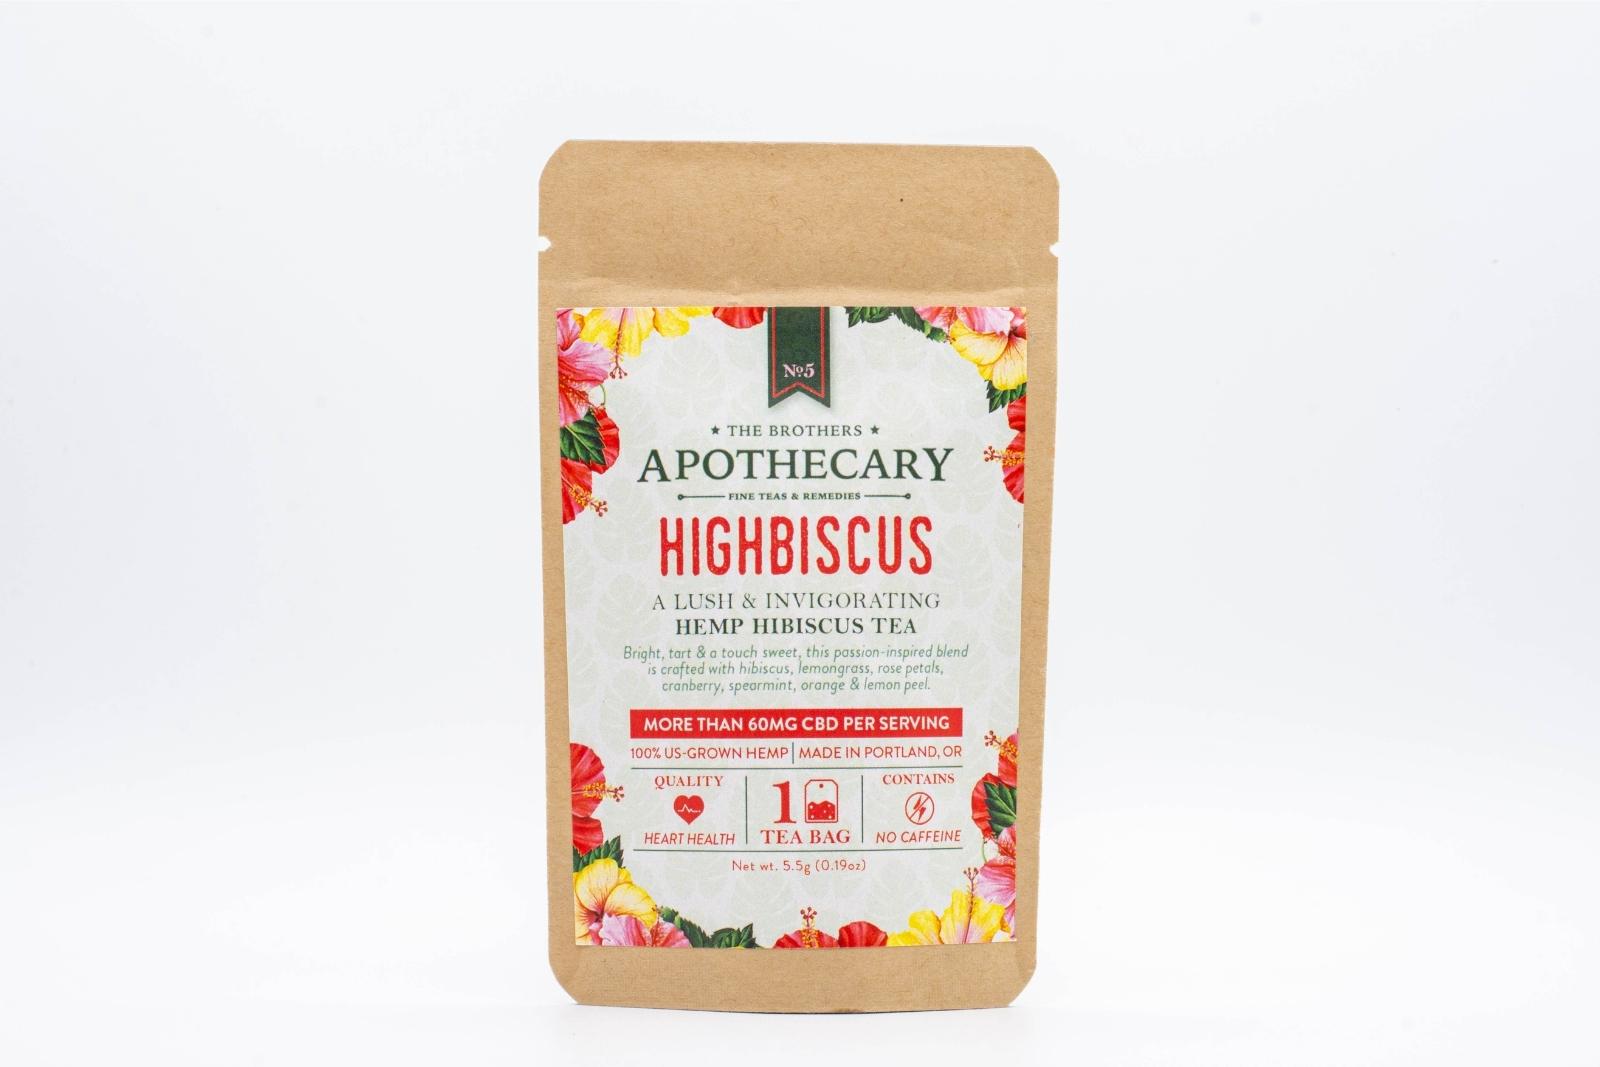 A small packet of The Brothers Apothecary's Highbiscus Tea on a white background